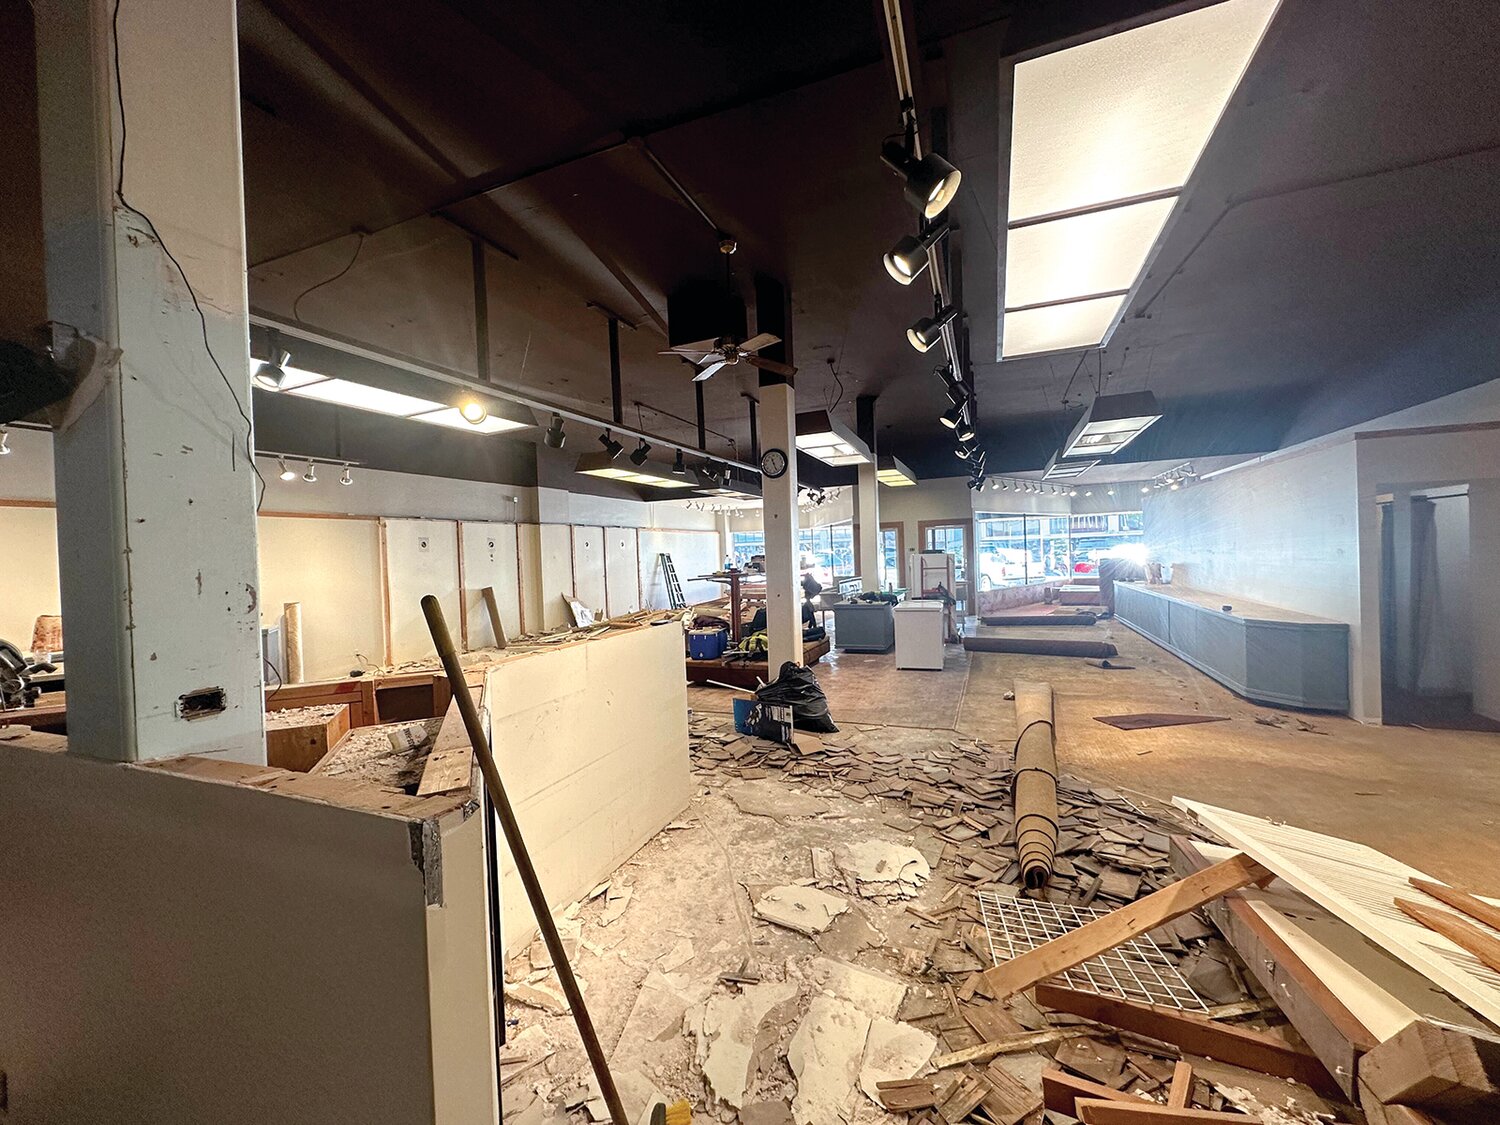 Once the Northwest Salmon Smokehouse is open, it will be located at 486 N. Market Blvd in Chehalis. The space is pictured here while under renovations last month.